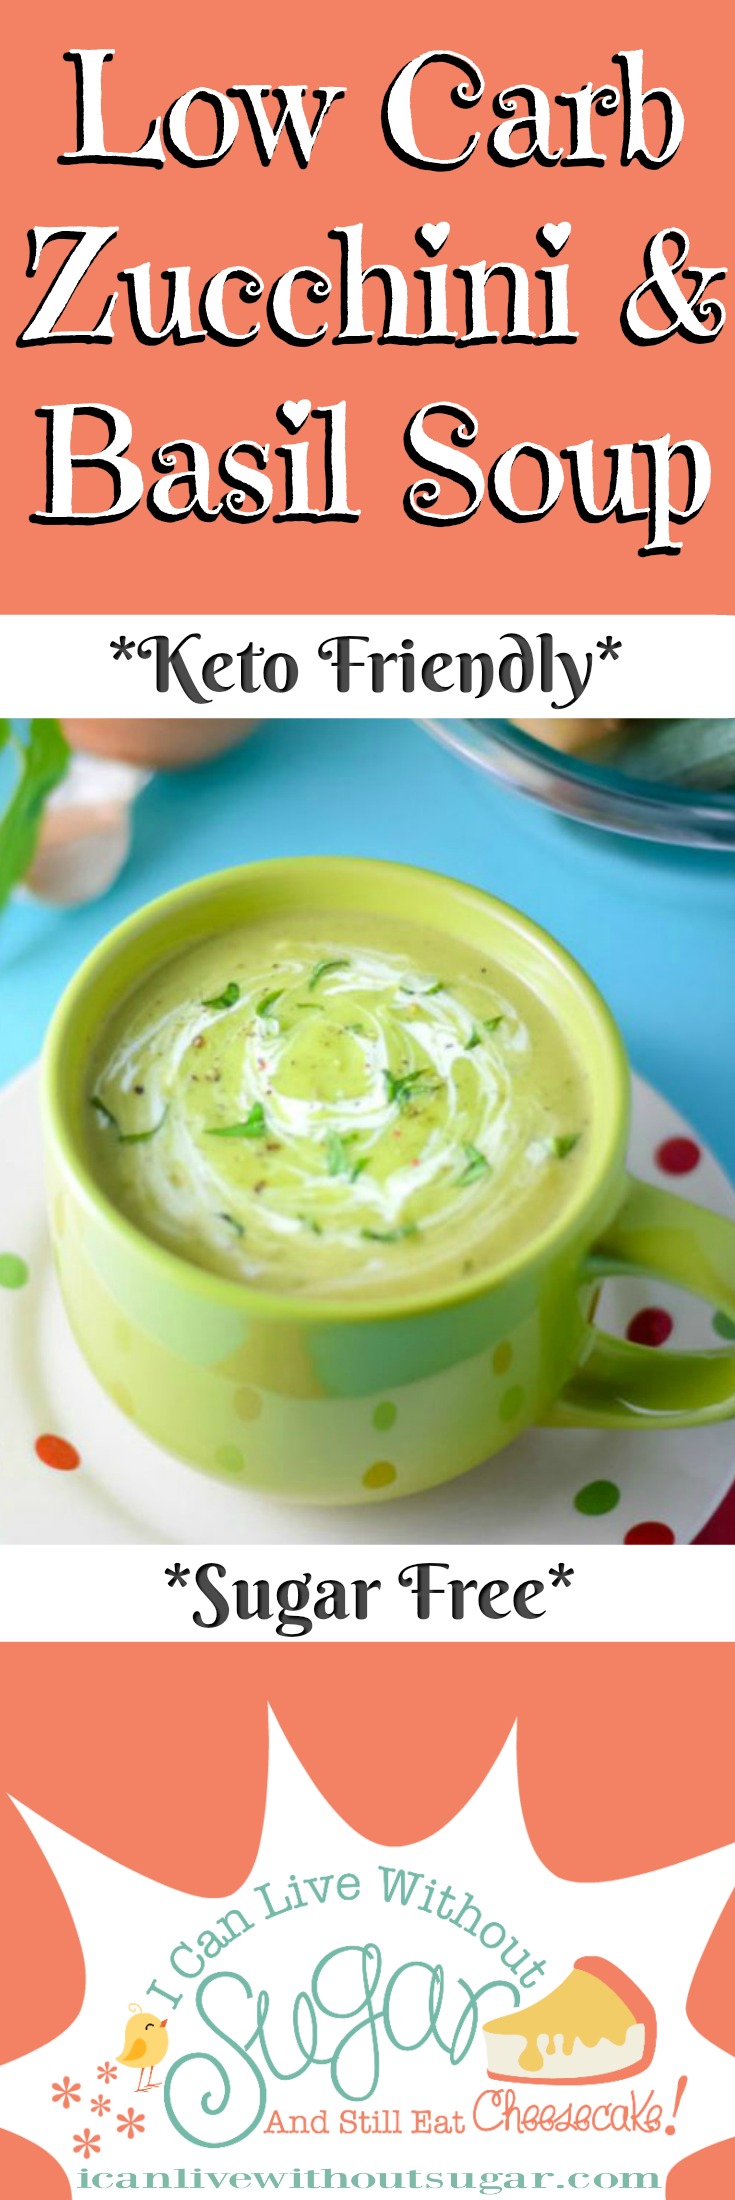 Low Carb Zucchini and Basil Soup. Quick and easy, sugar free and keto friendly. Best tasting zucchini and basil soup. Enjoy as an entrée, quick lunch or light dinner. Makes a  great winter tummy warmer!